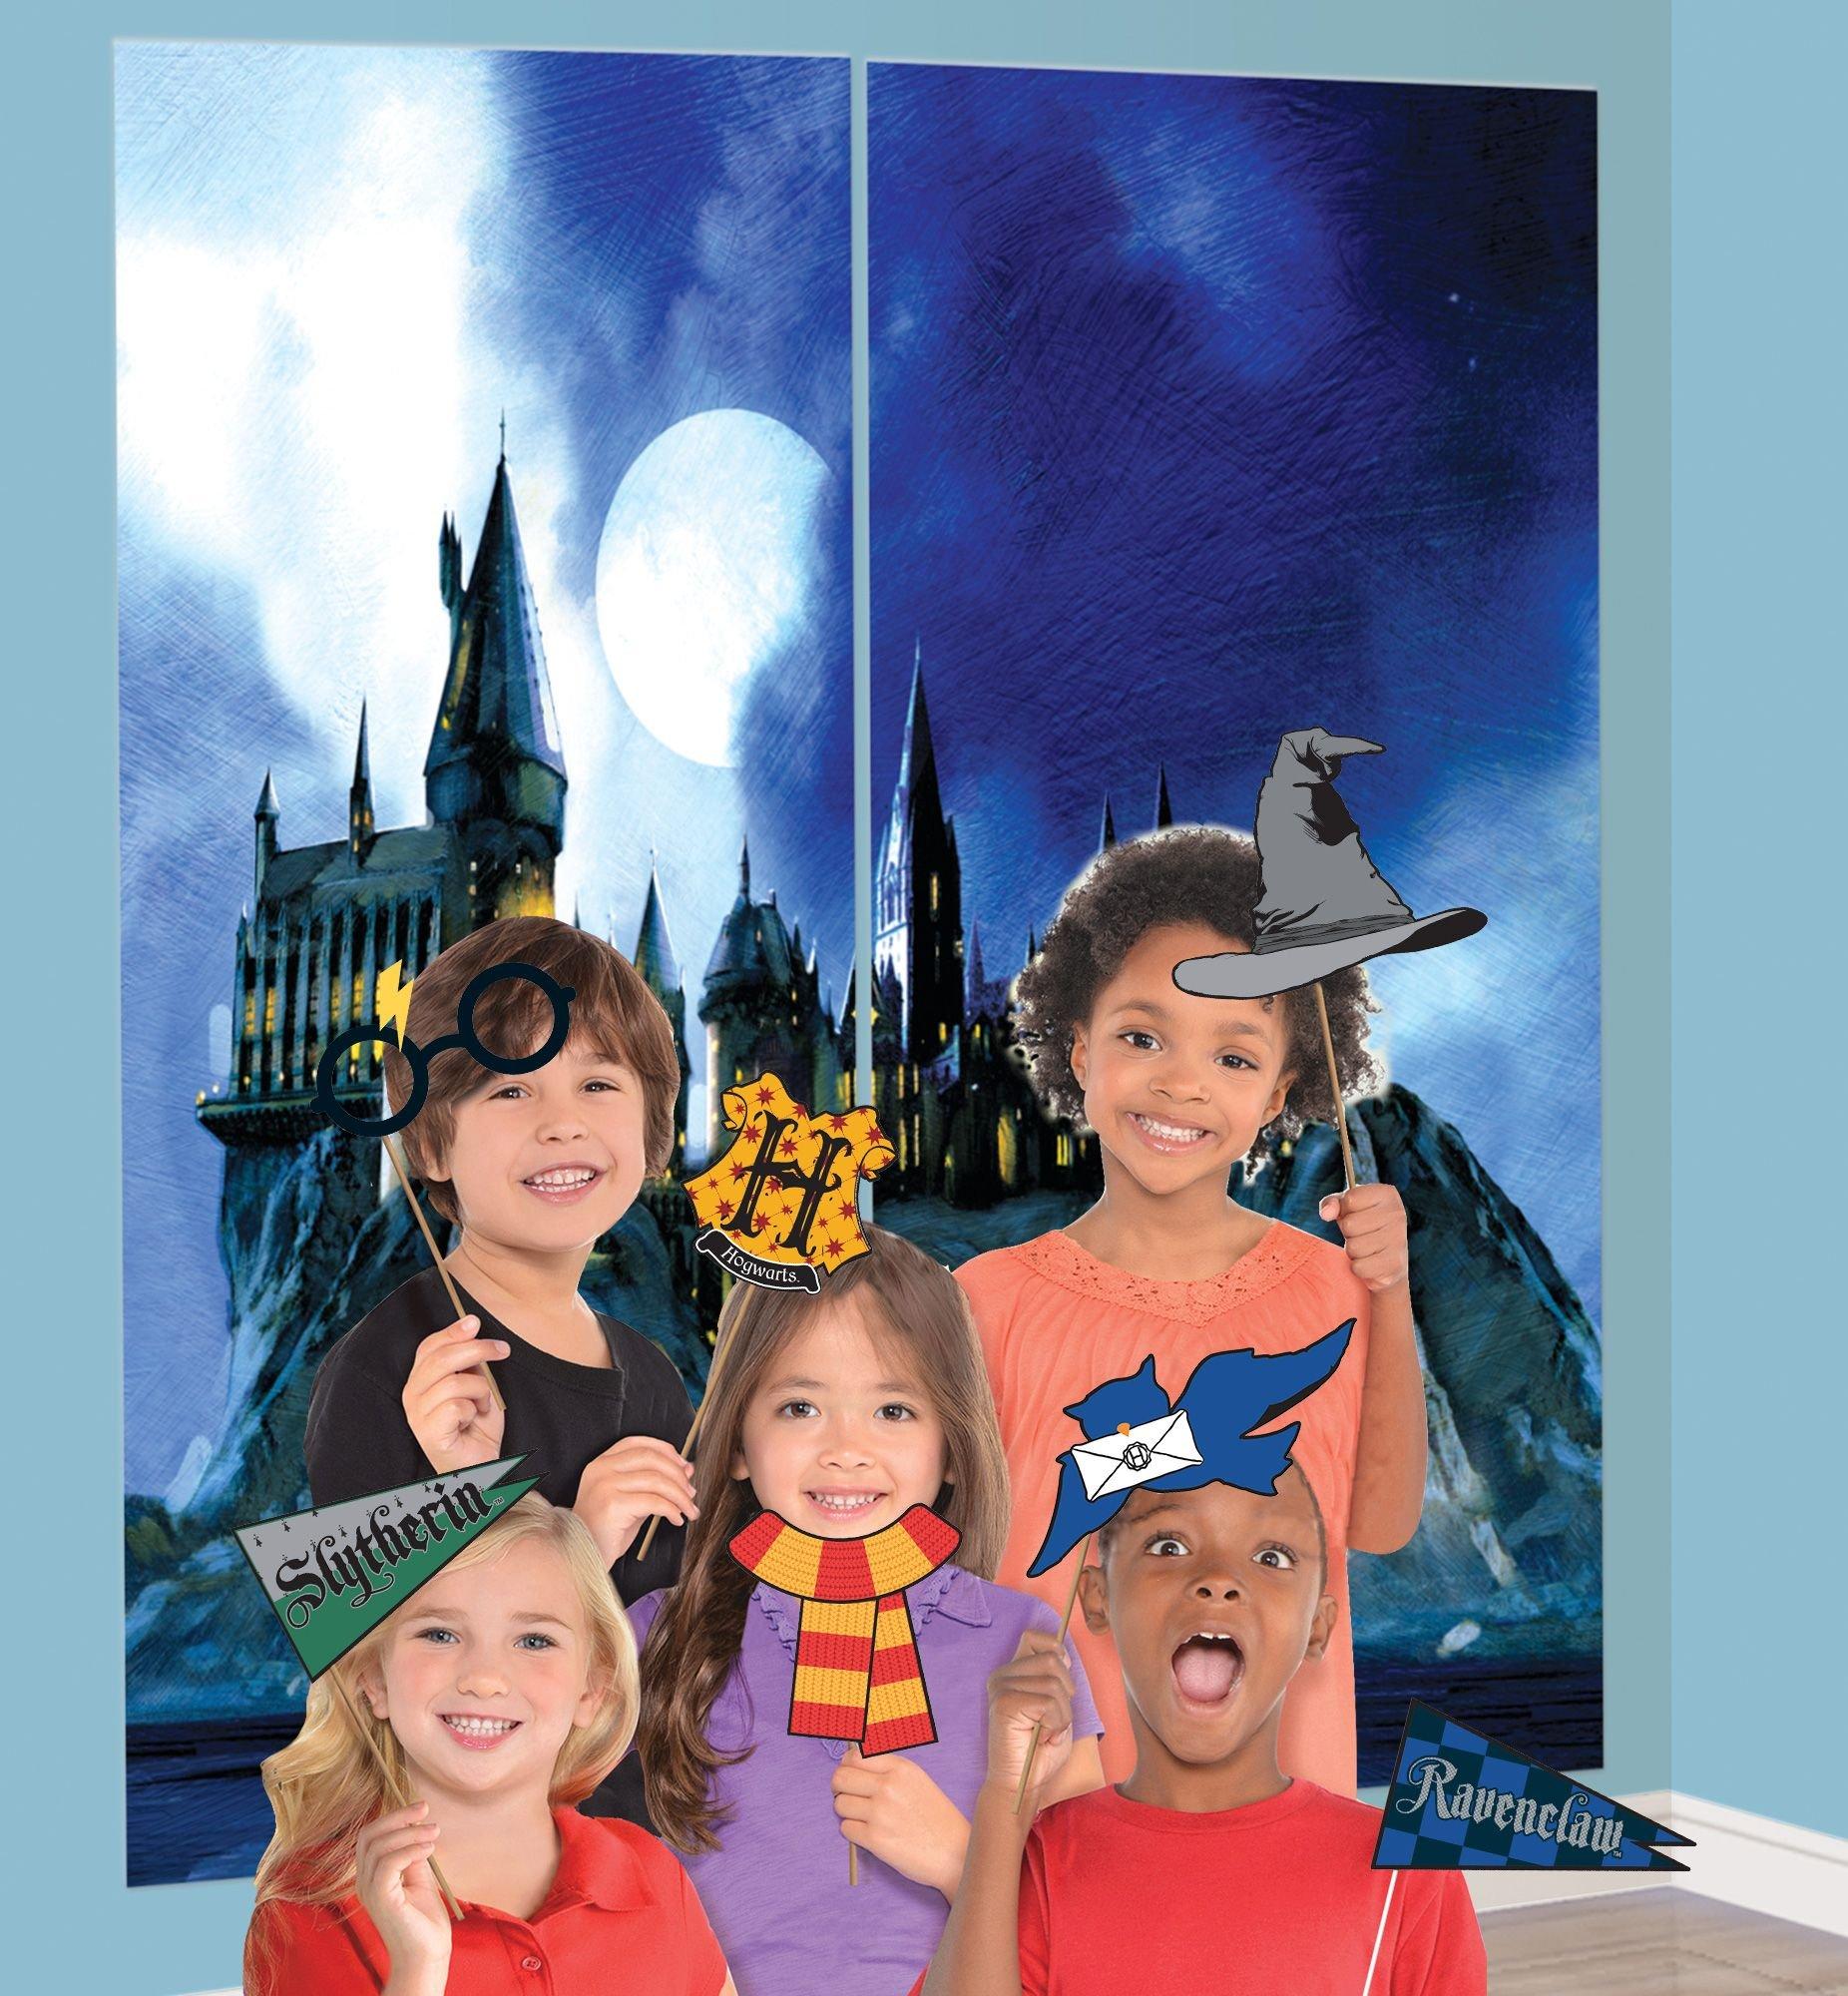 Harry Potter Photo Booth Props Birthday Halloween Party Supplies 8 Piece  New